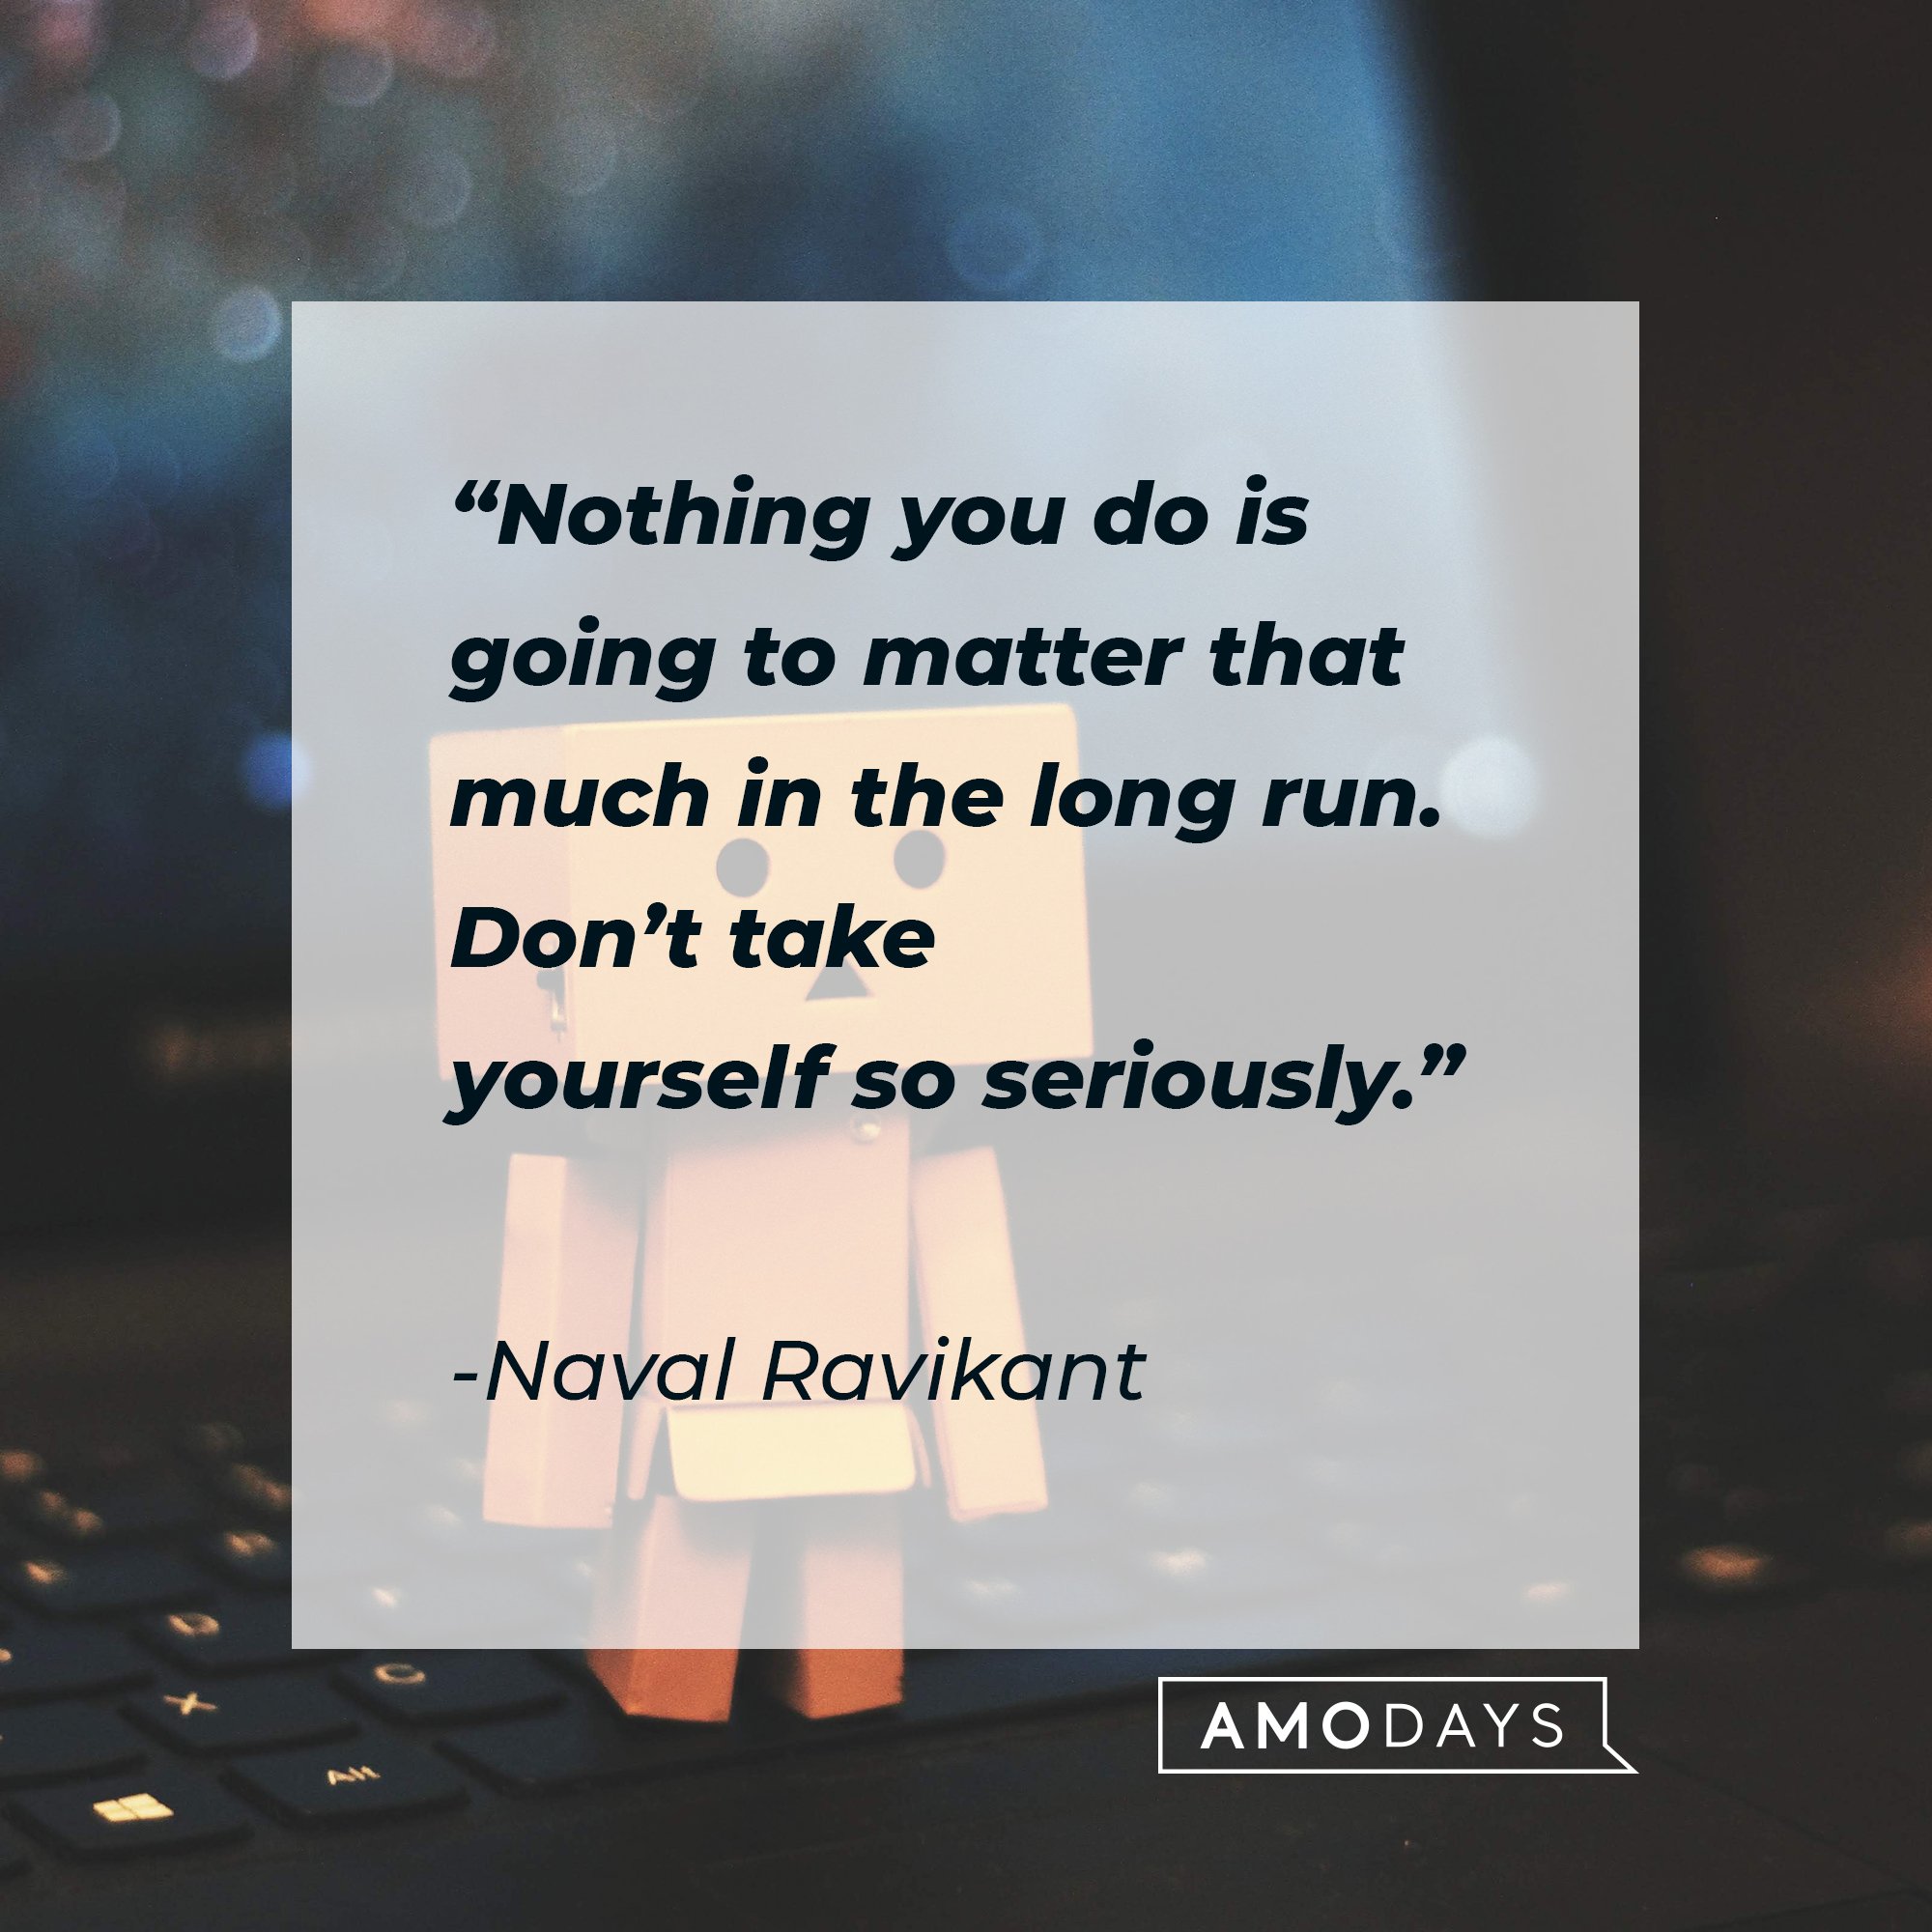 " Naval Ravikant's quote: Nothing you do is going to matter that much in the long run. Don’t take yourself so seriously." | Image: AmoDays